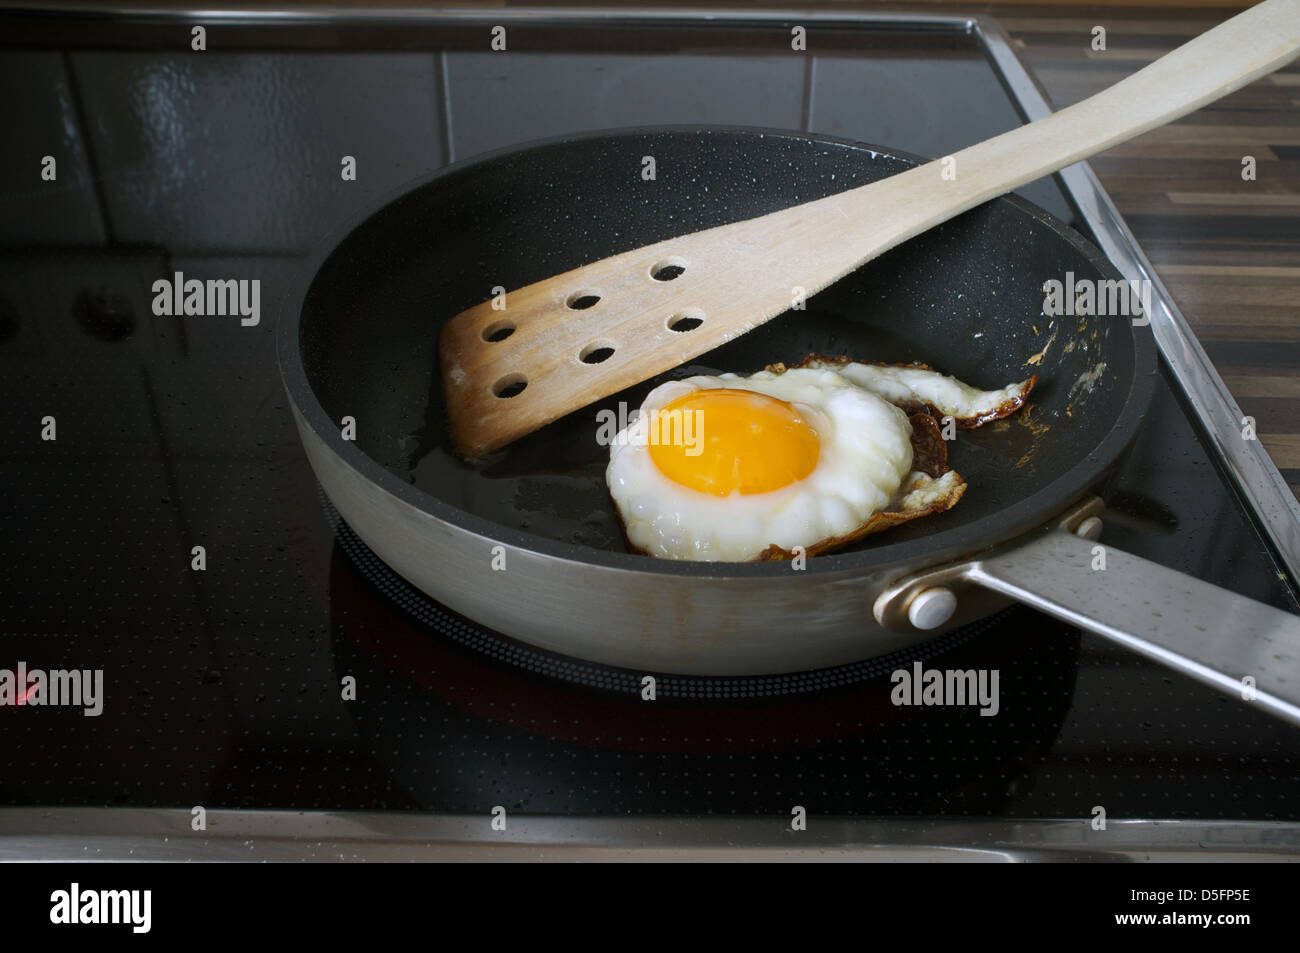 Fried egg in frying pan Stock Photo